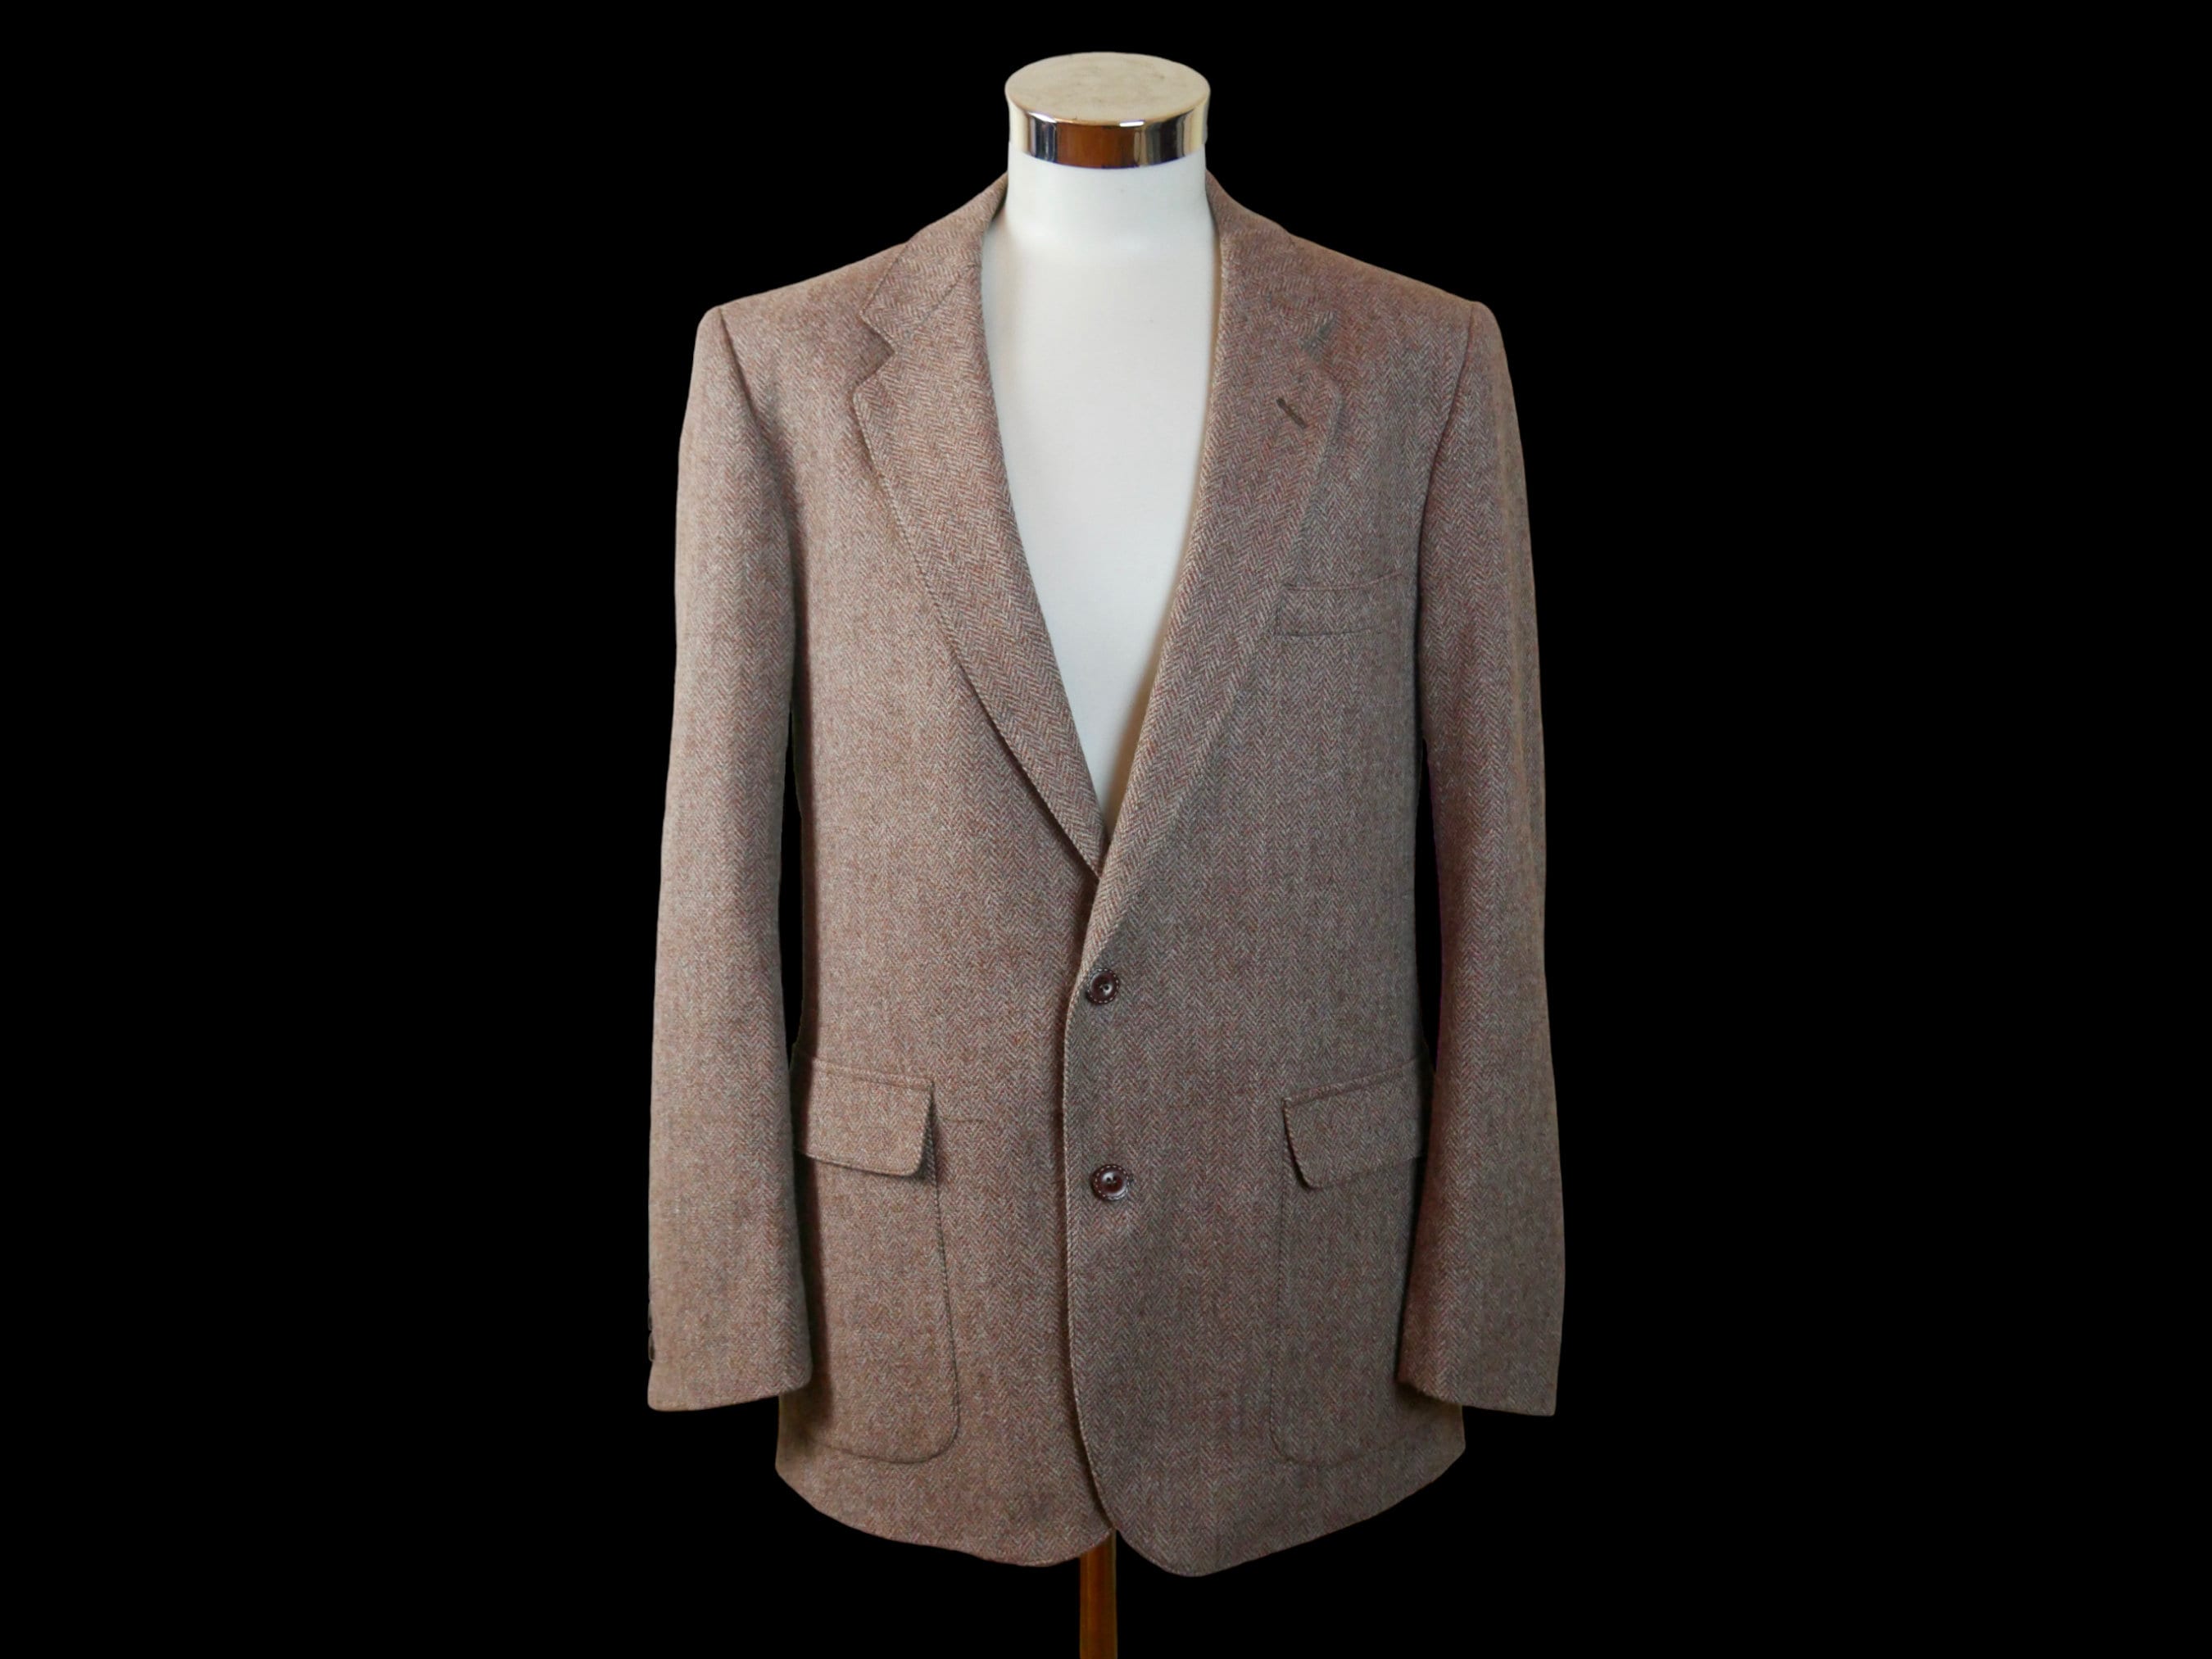 What is the purpose of the elbow patch on tweed professor jackets? - Quora